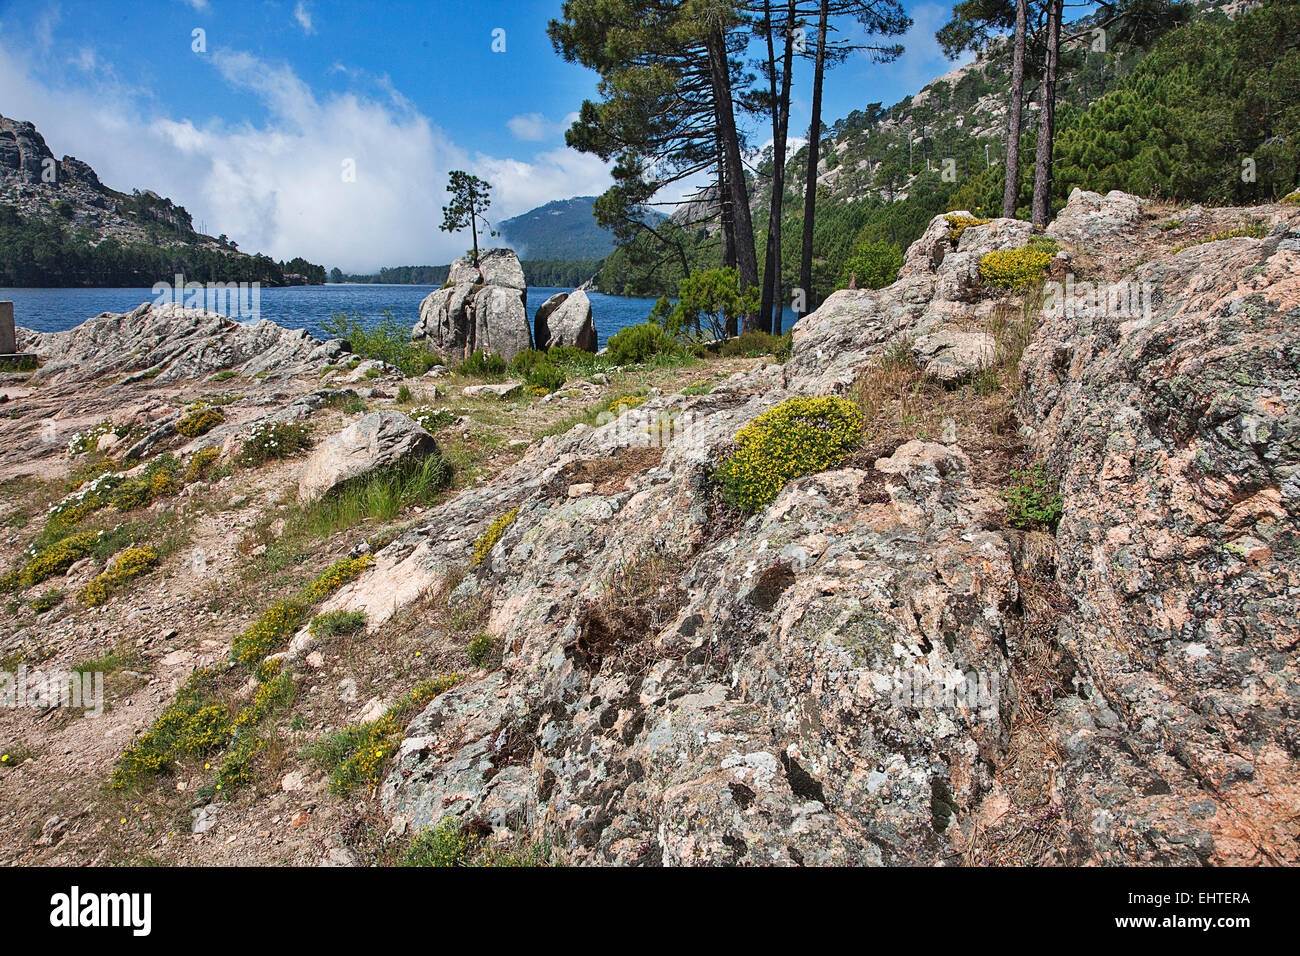 A mountain  lake near the village of Zonza in central Corsica  becomes a dramatic scene with incoming weather. Stock Photo